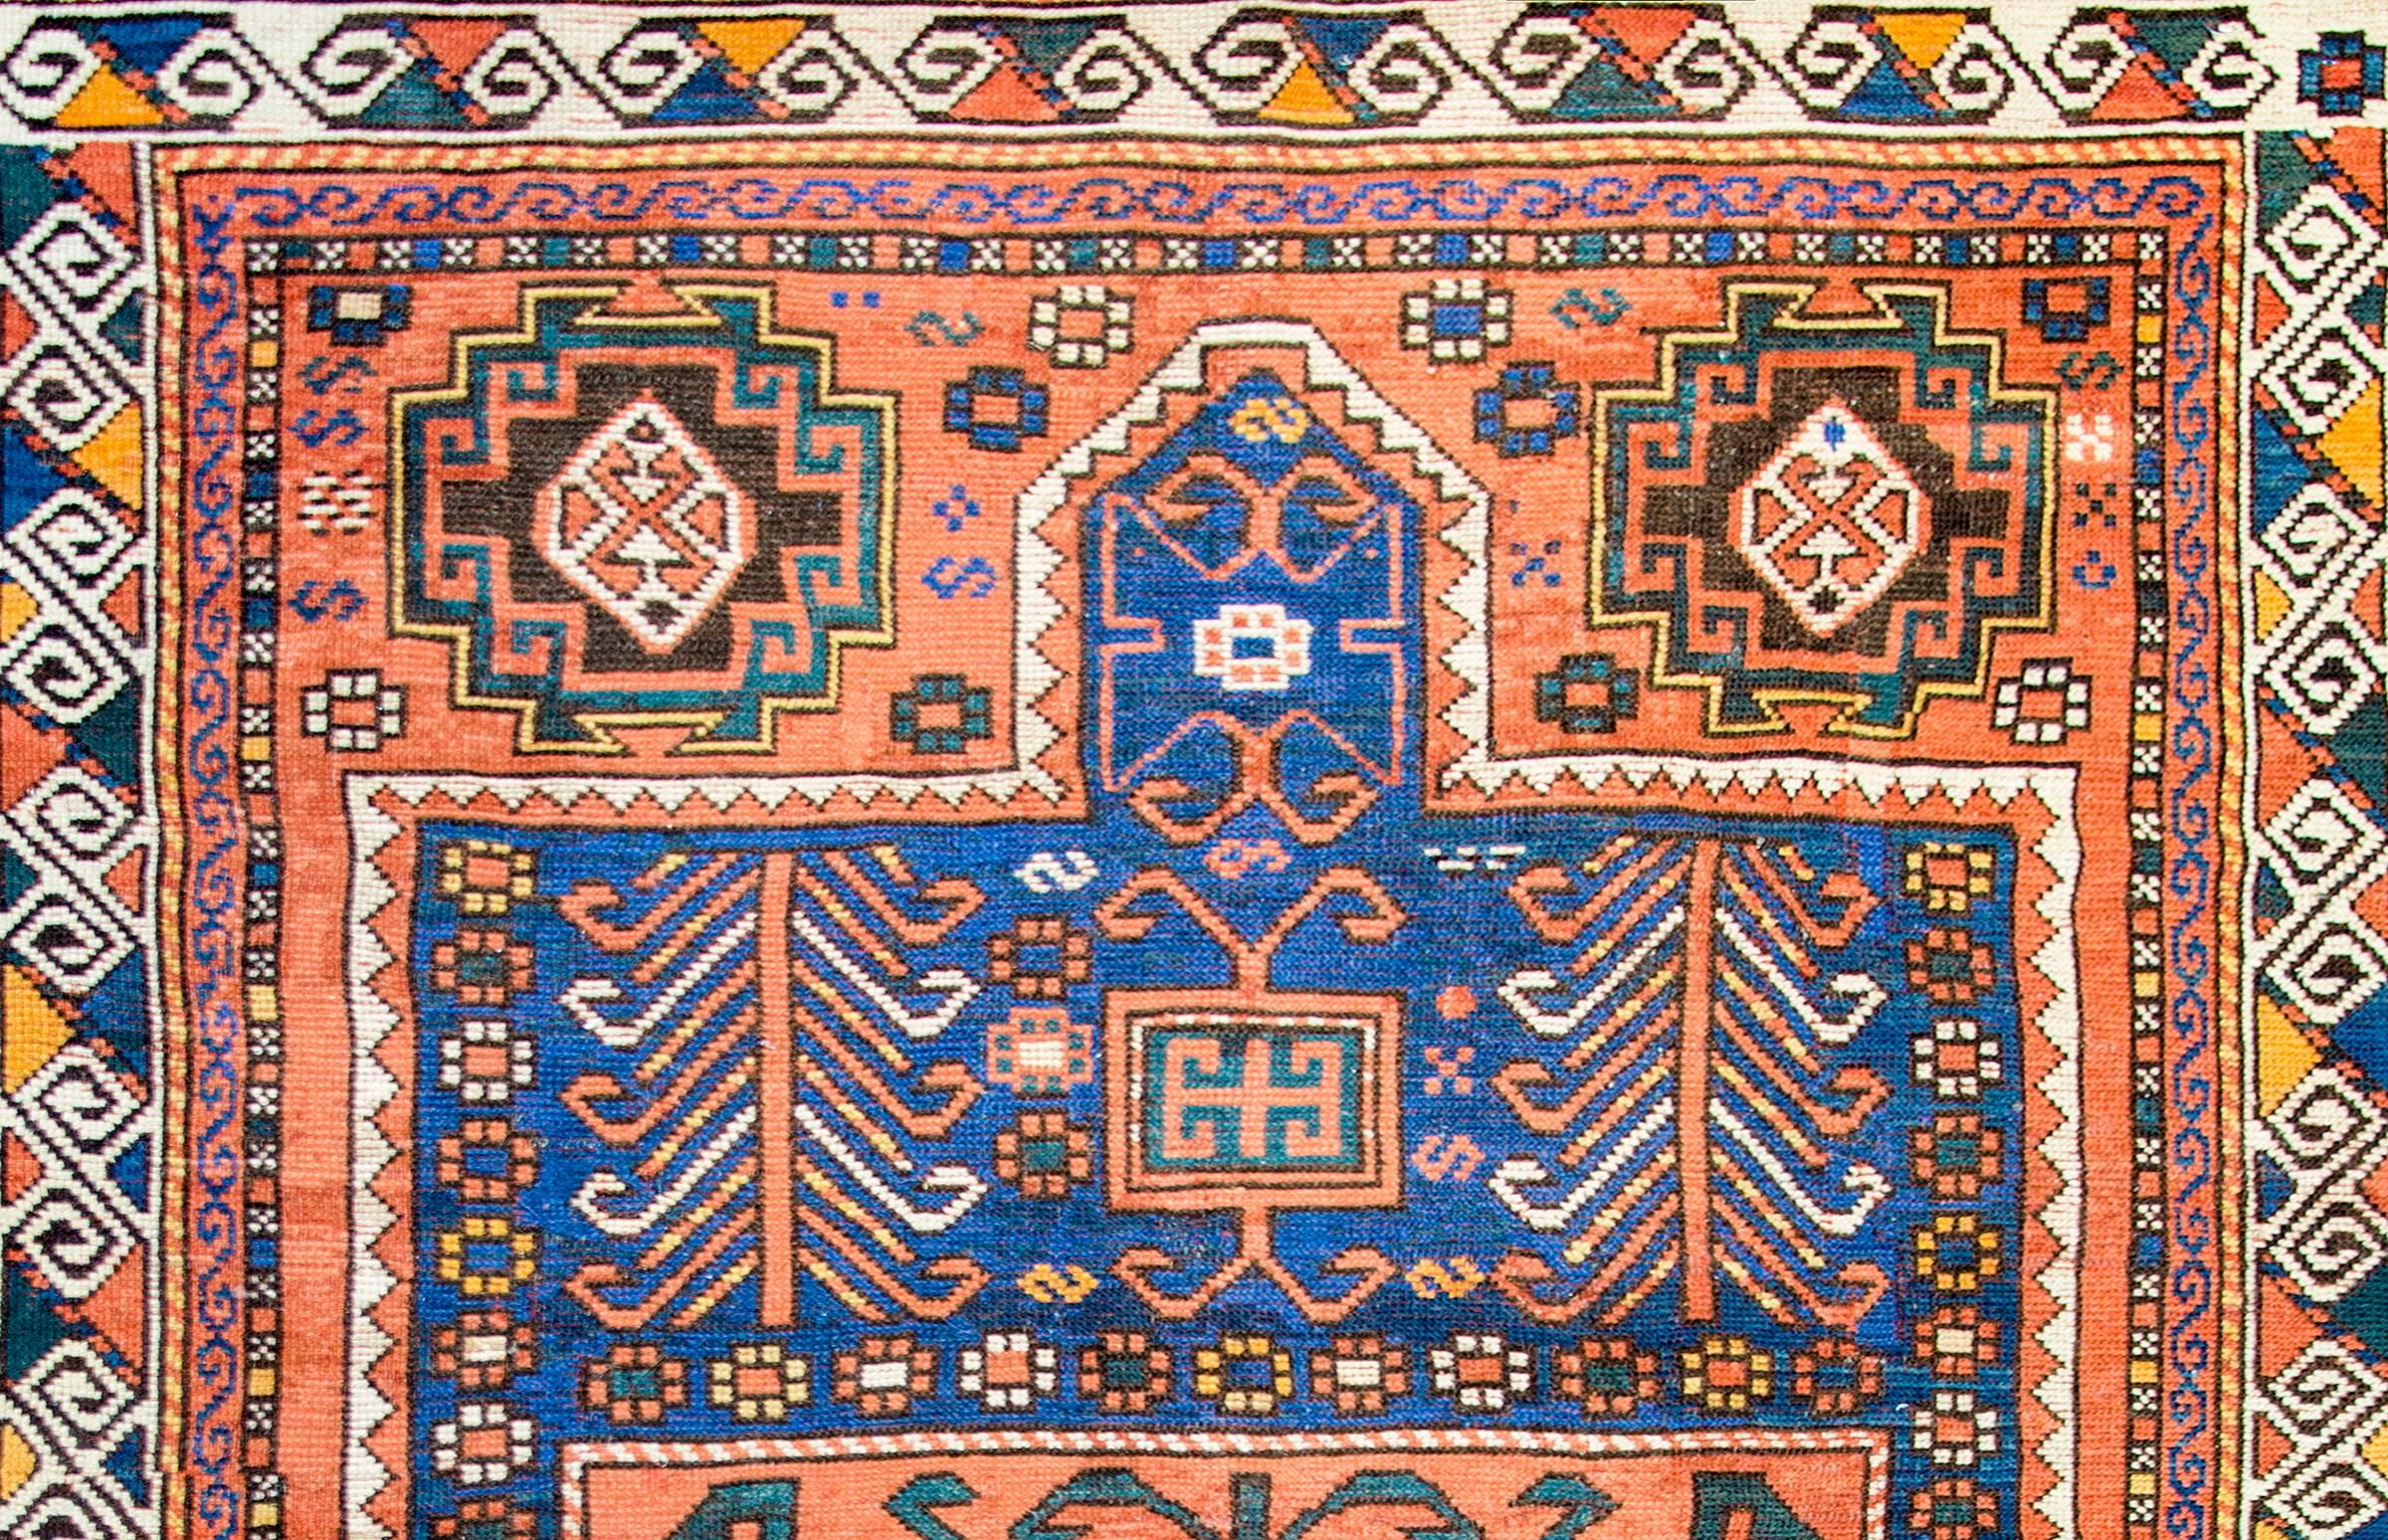 A late-19th century Kazak rug with a beautiful pattern with trees-of-life, flowers, and other geometric shapes, woven in light and dark indigo, green, brown, and gold colored wool on a brilliant crimson colored background. The border is complex with